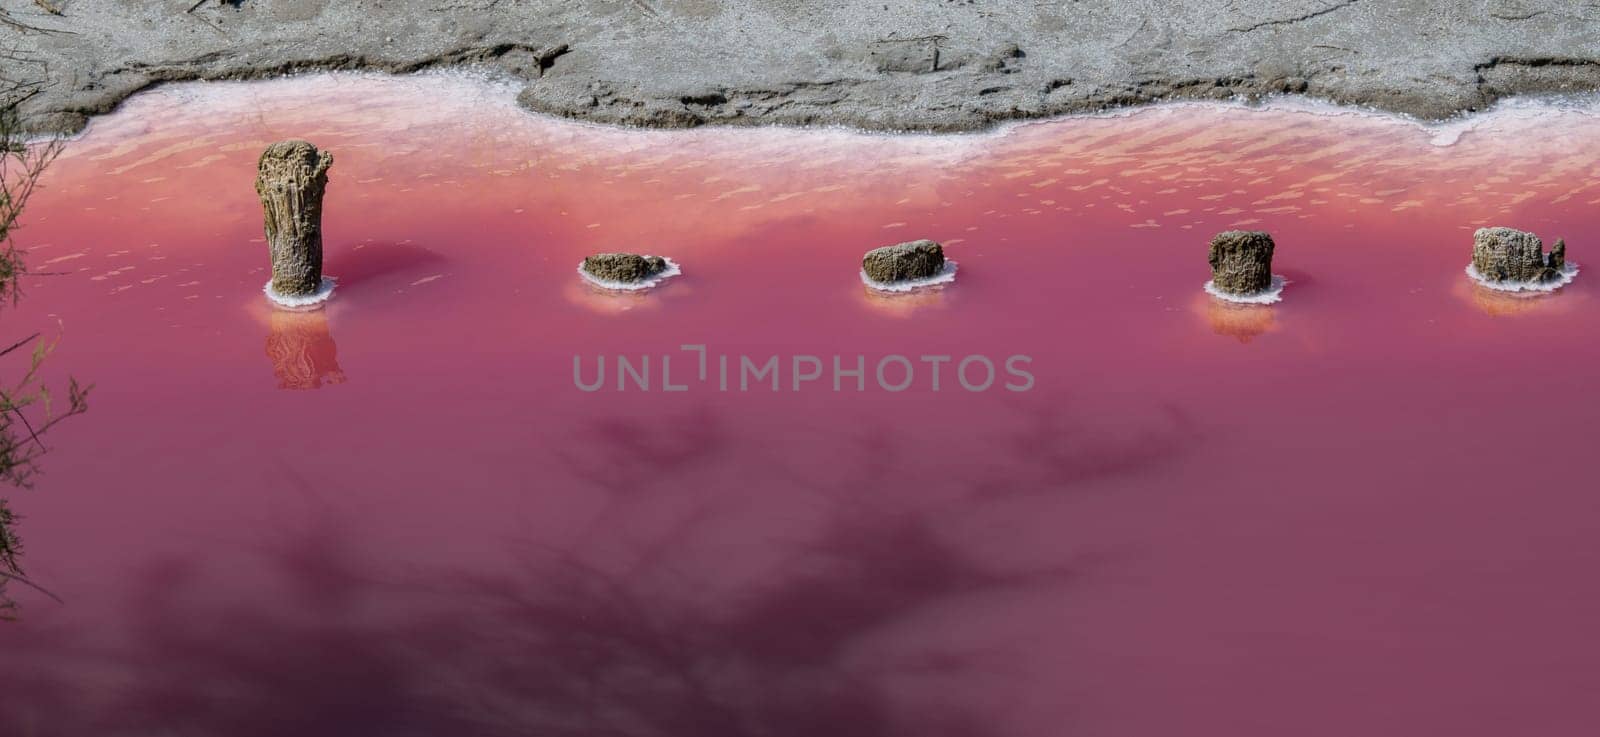 Wooden stakes corroded by salt and pink salt water, Camargue, Salin de Guiraud, France by FreeProd